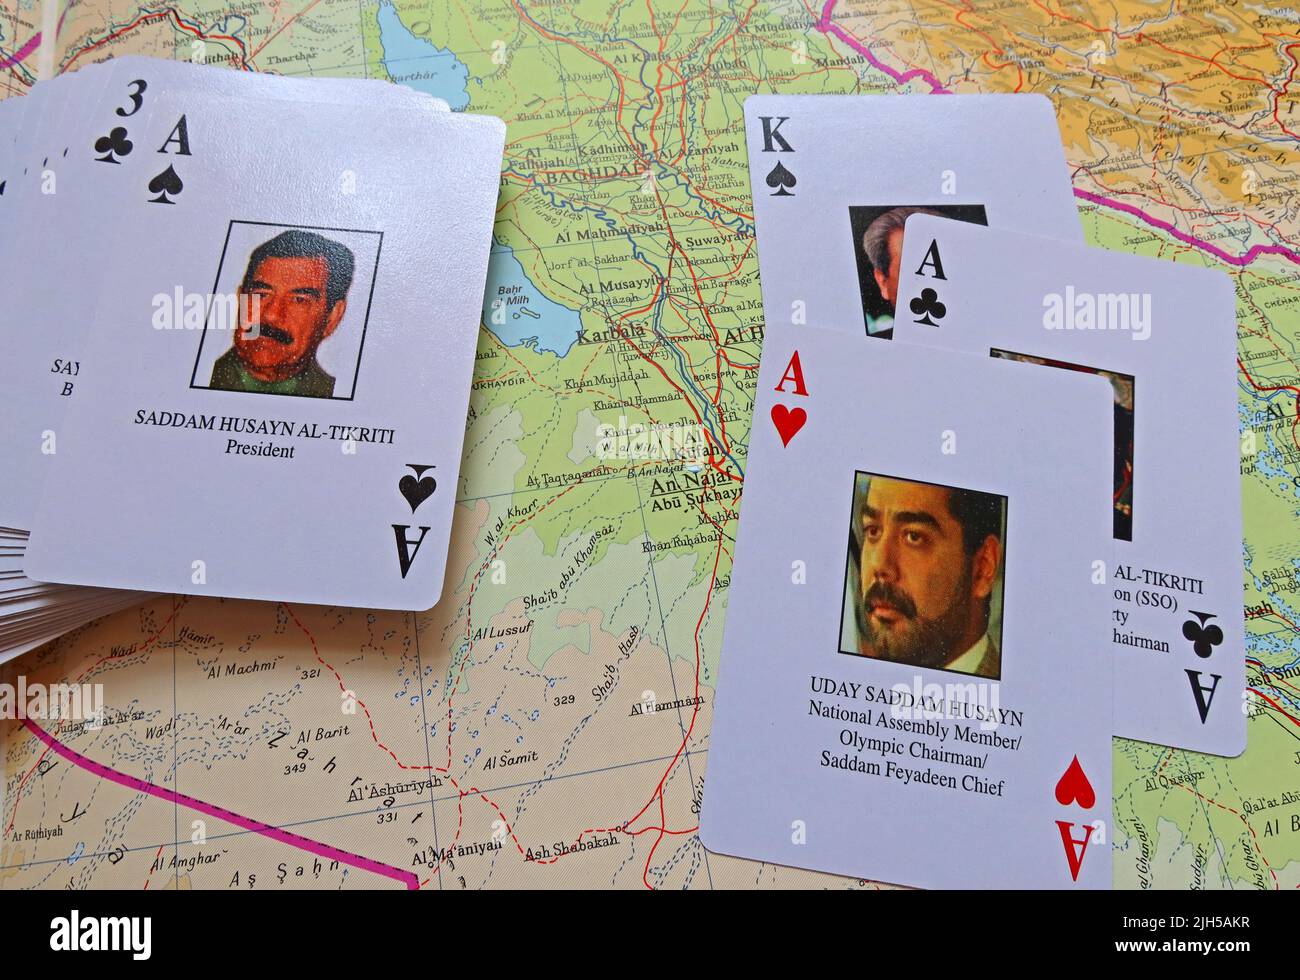 Saddam Hussein Abd al-Majid al-Tikriti, ace of spades playing cards, issued by USA, during coalition war in Iraq, 2003 invasion,Iraqi Most Wanted Stock Photo